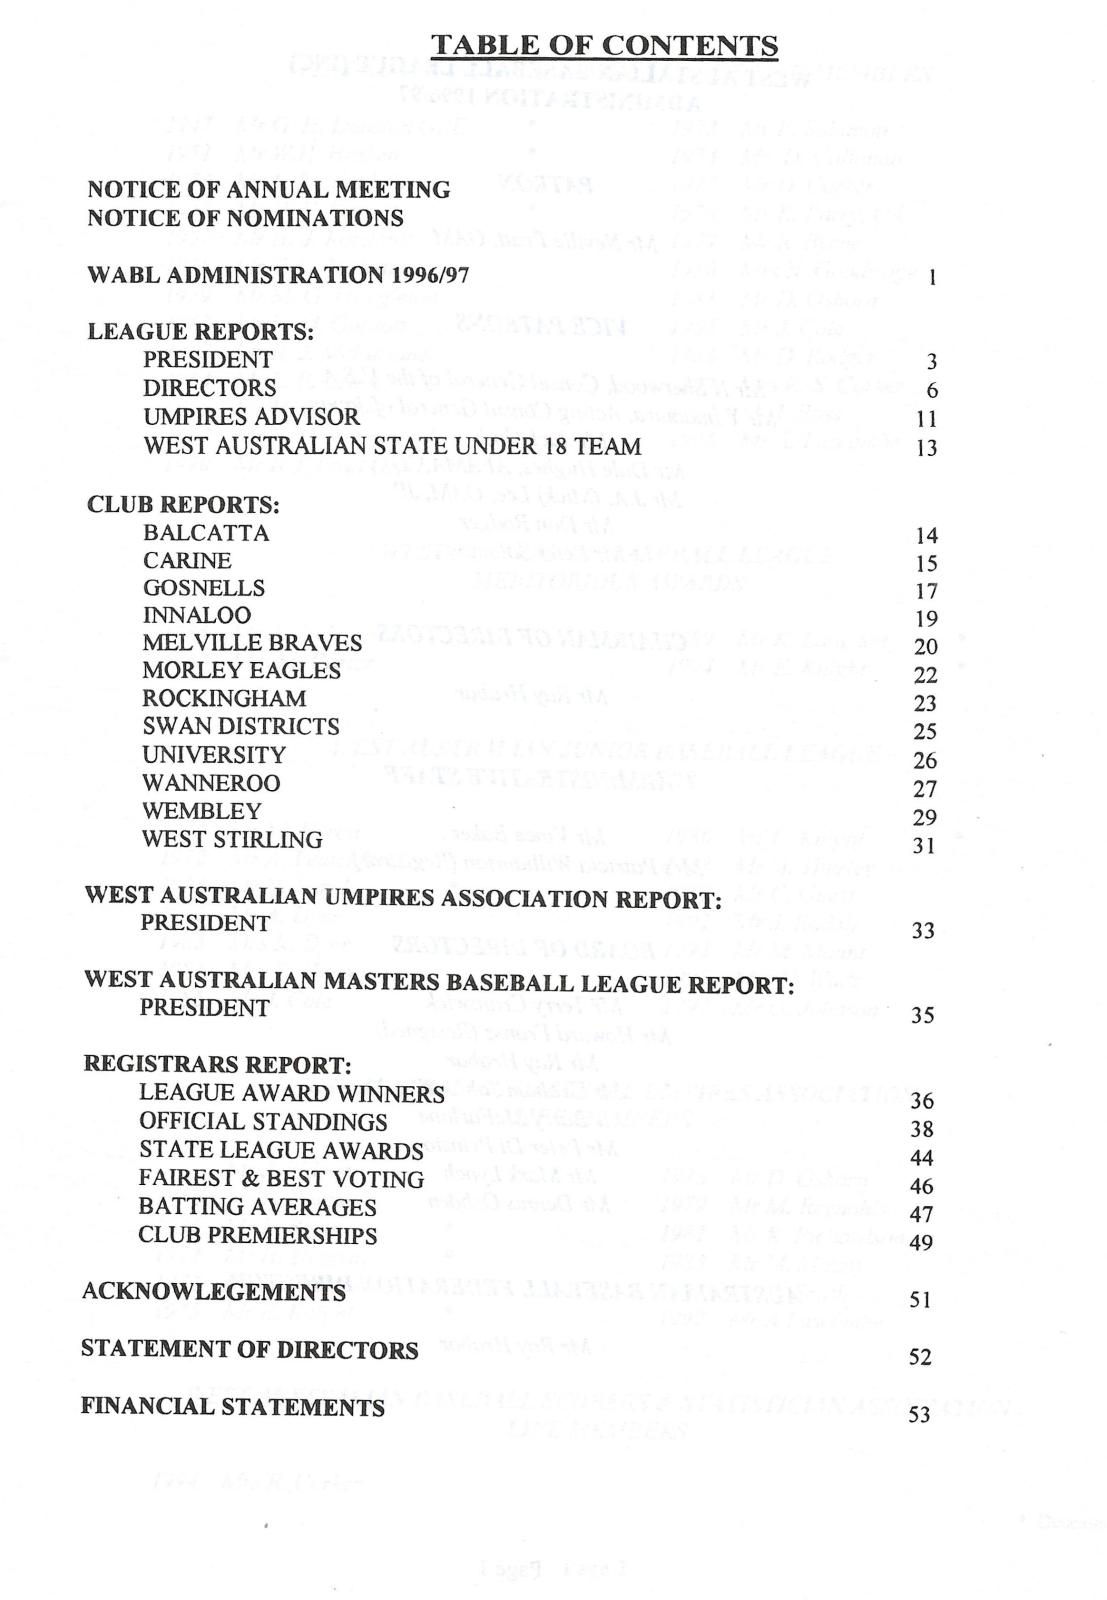 West Australian Baseball League 62nd Annual Report 1996-97 index page